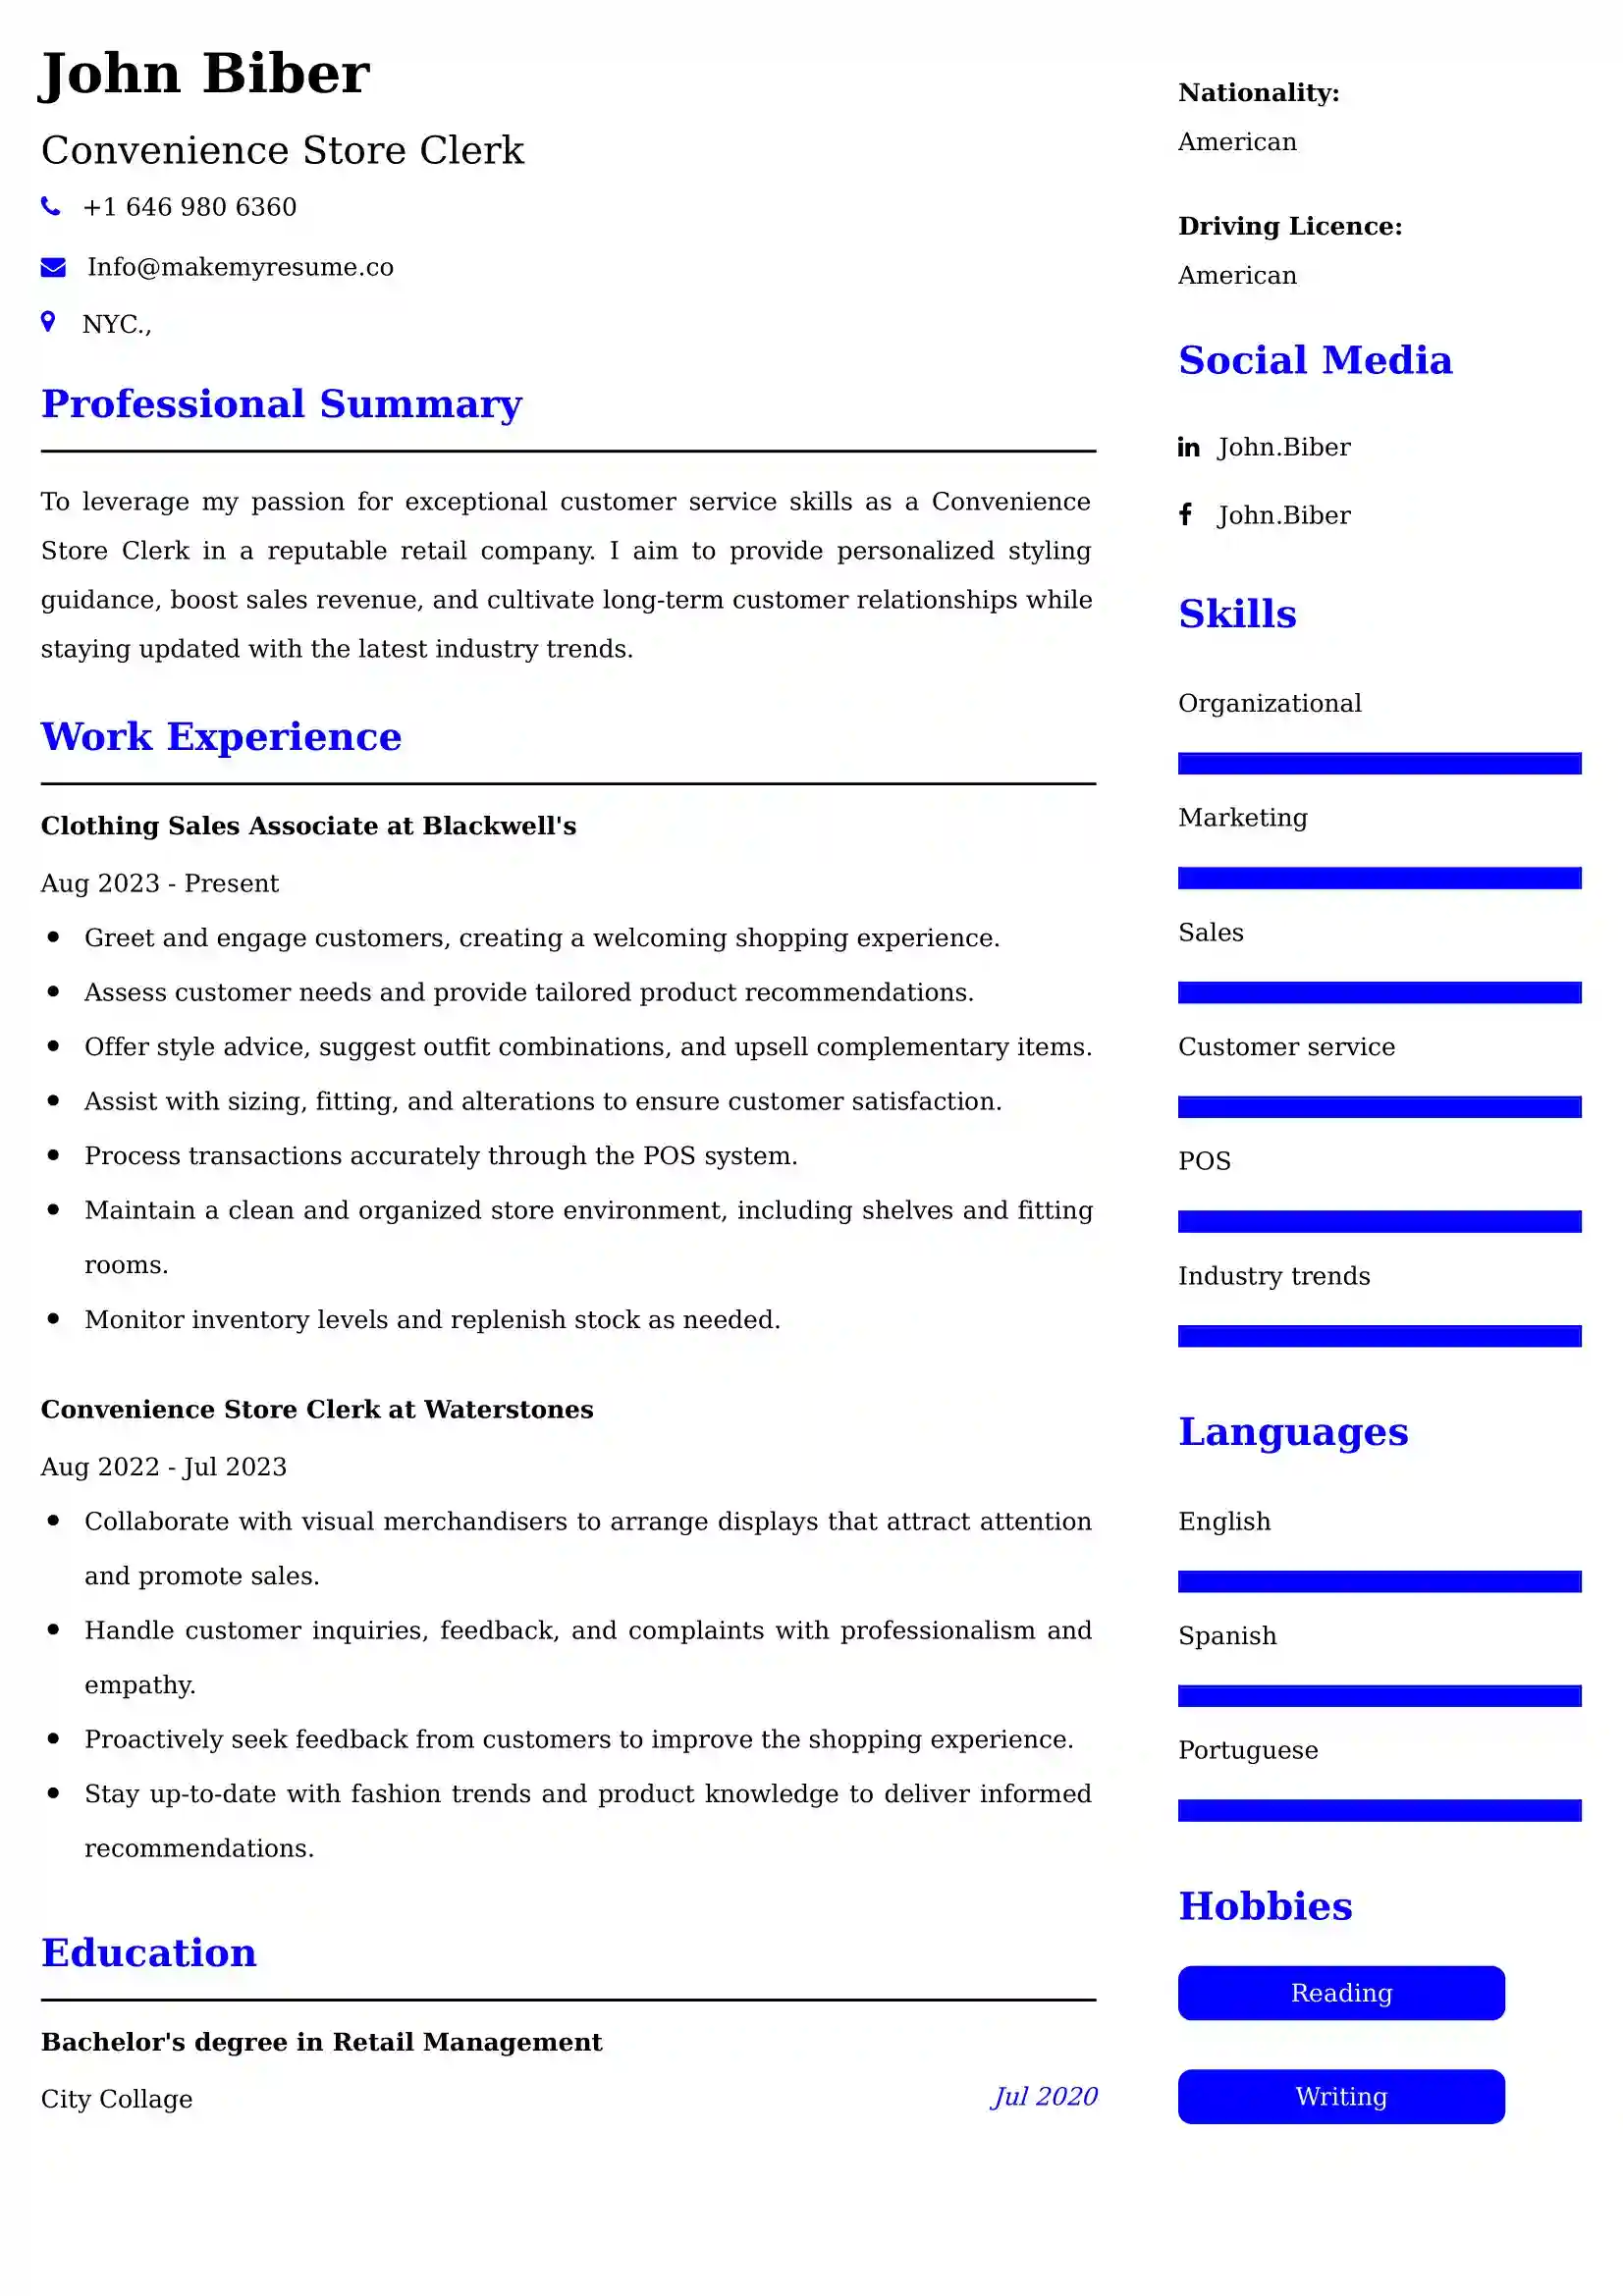 Convenience Store Clerk Resume Examples - Brazilian Format, Latest Template